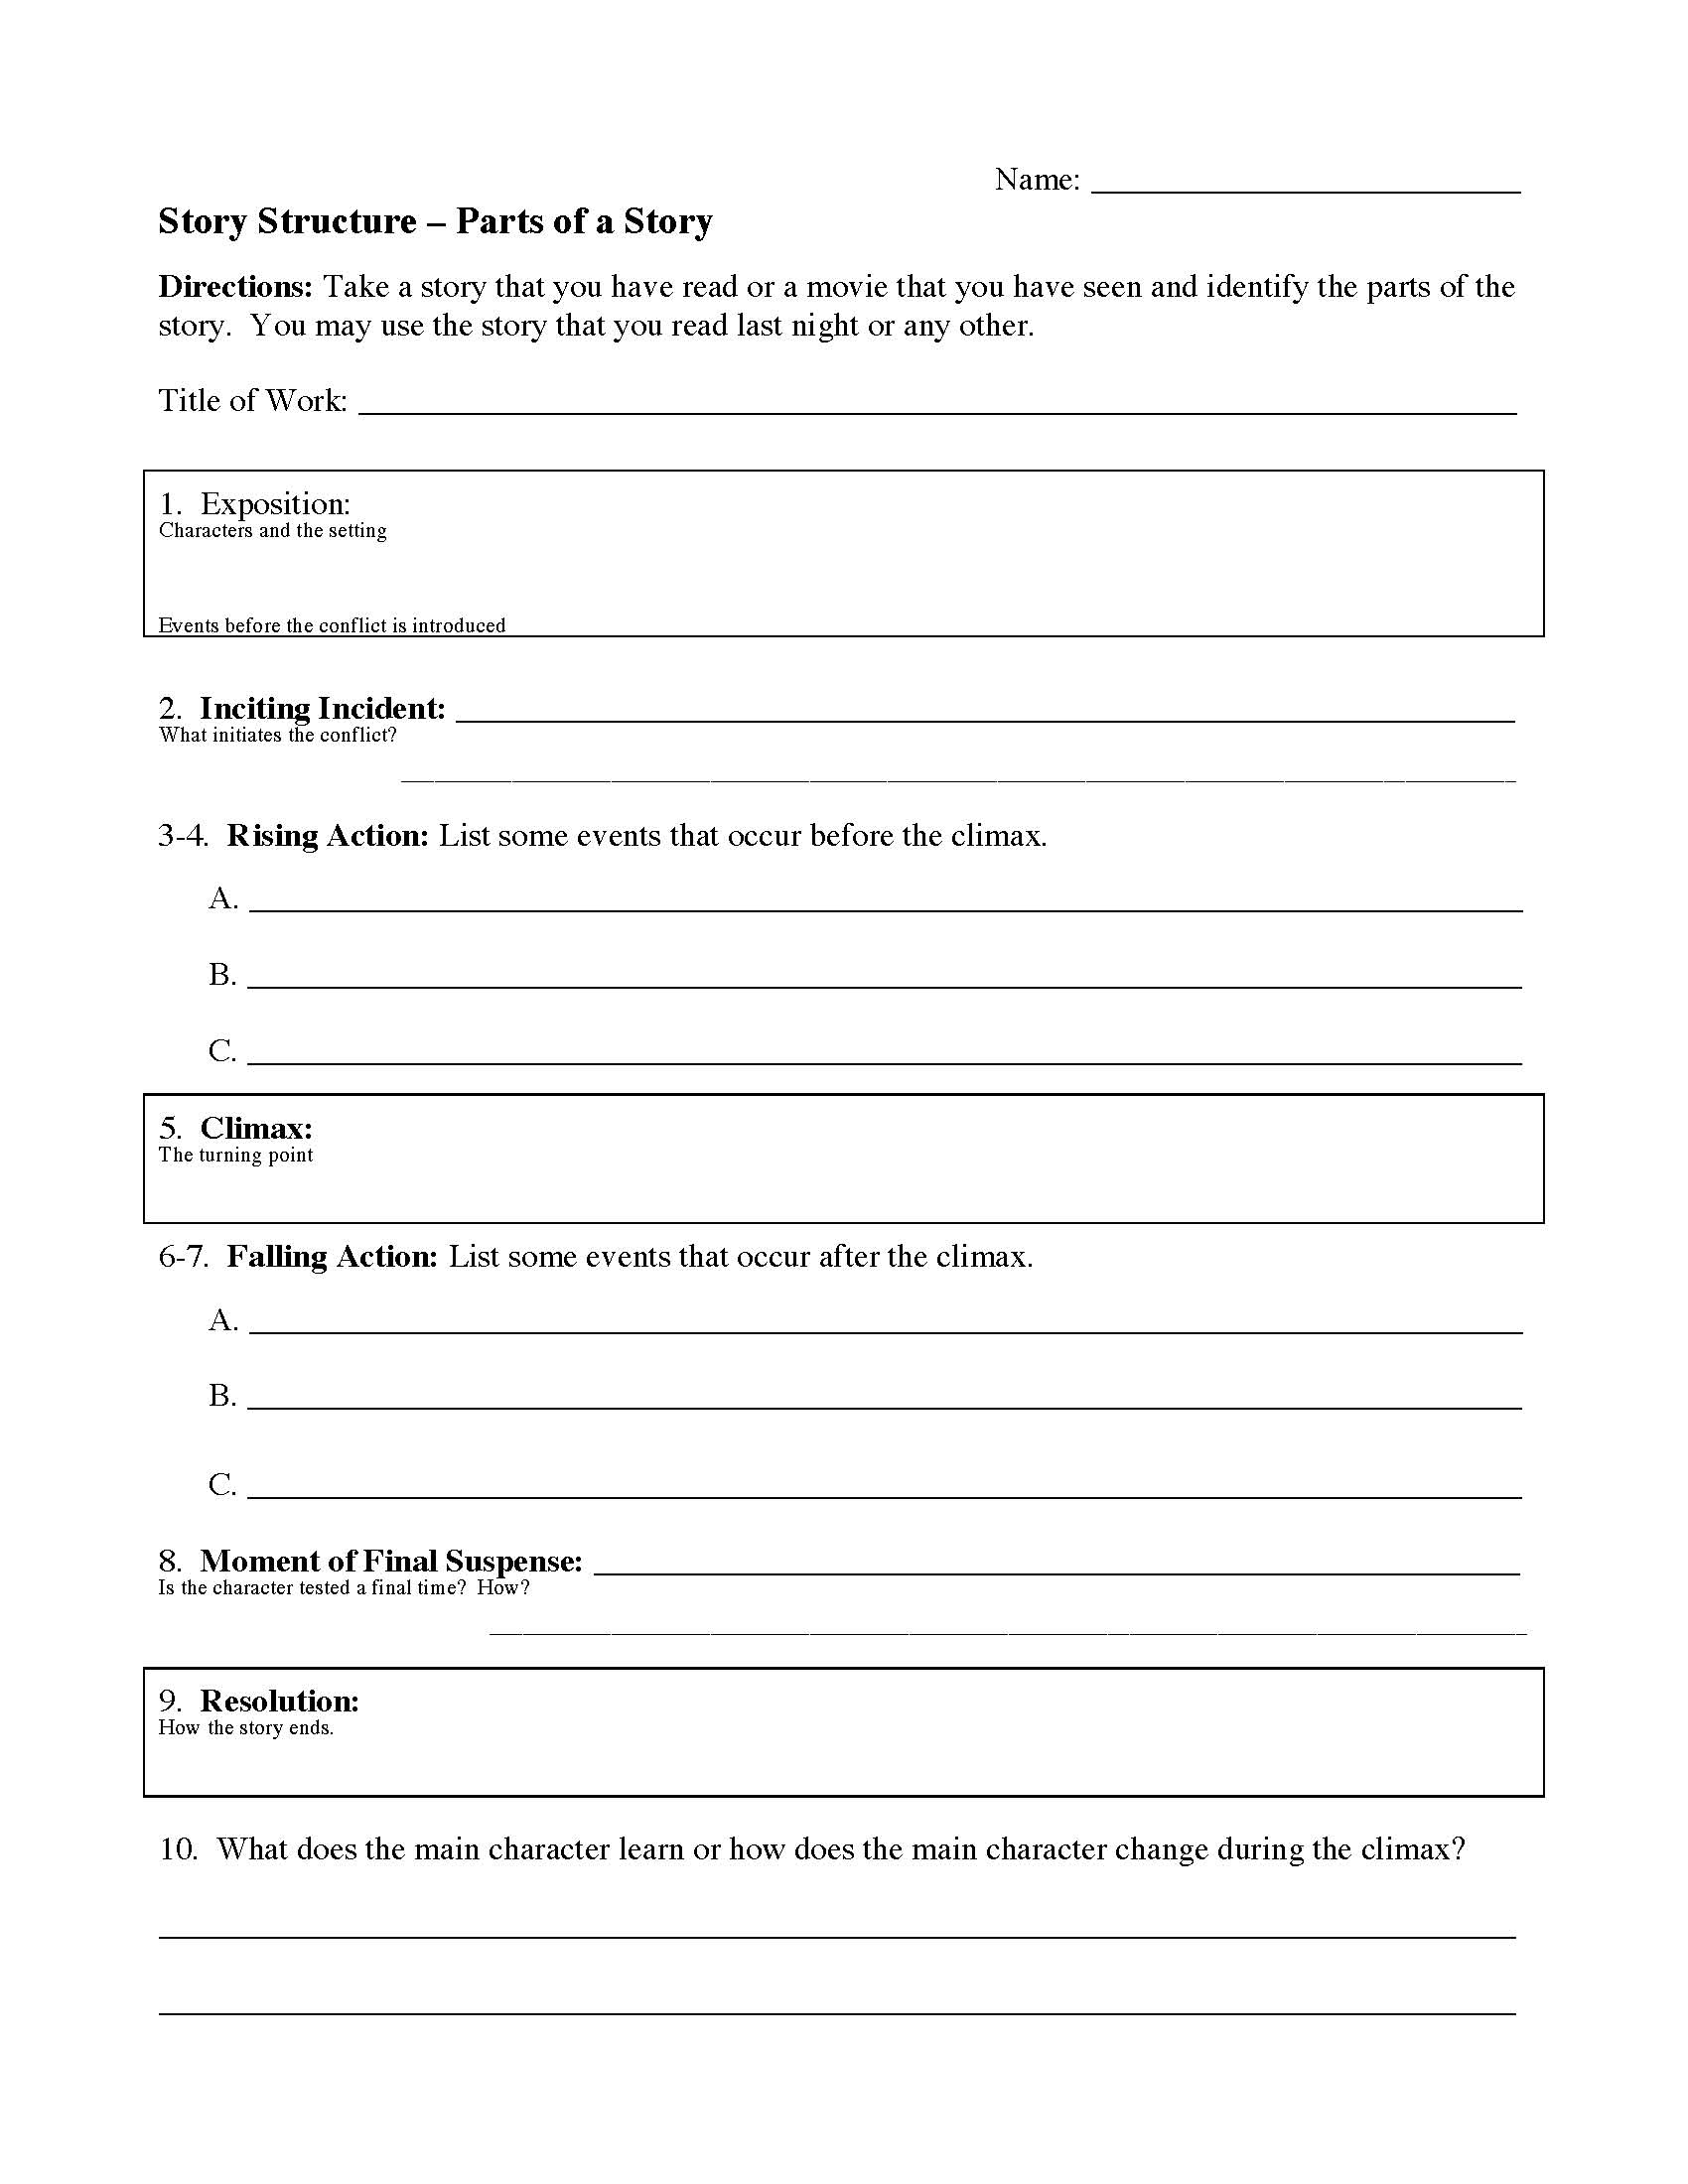 Five Parts Of A Story Worksheet Student Handouts - vrogue.co